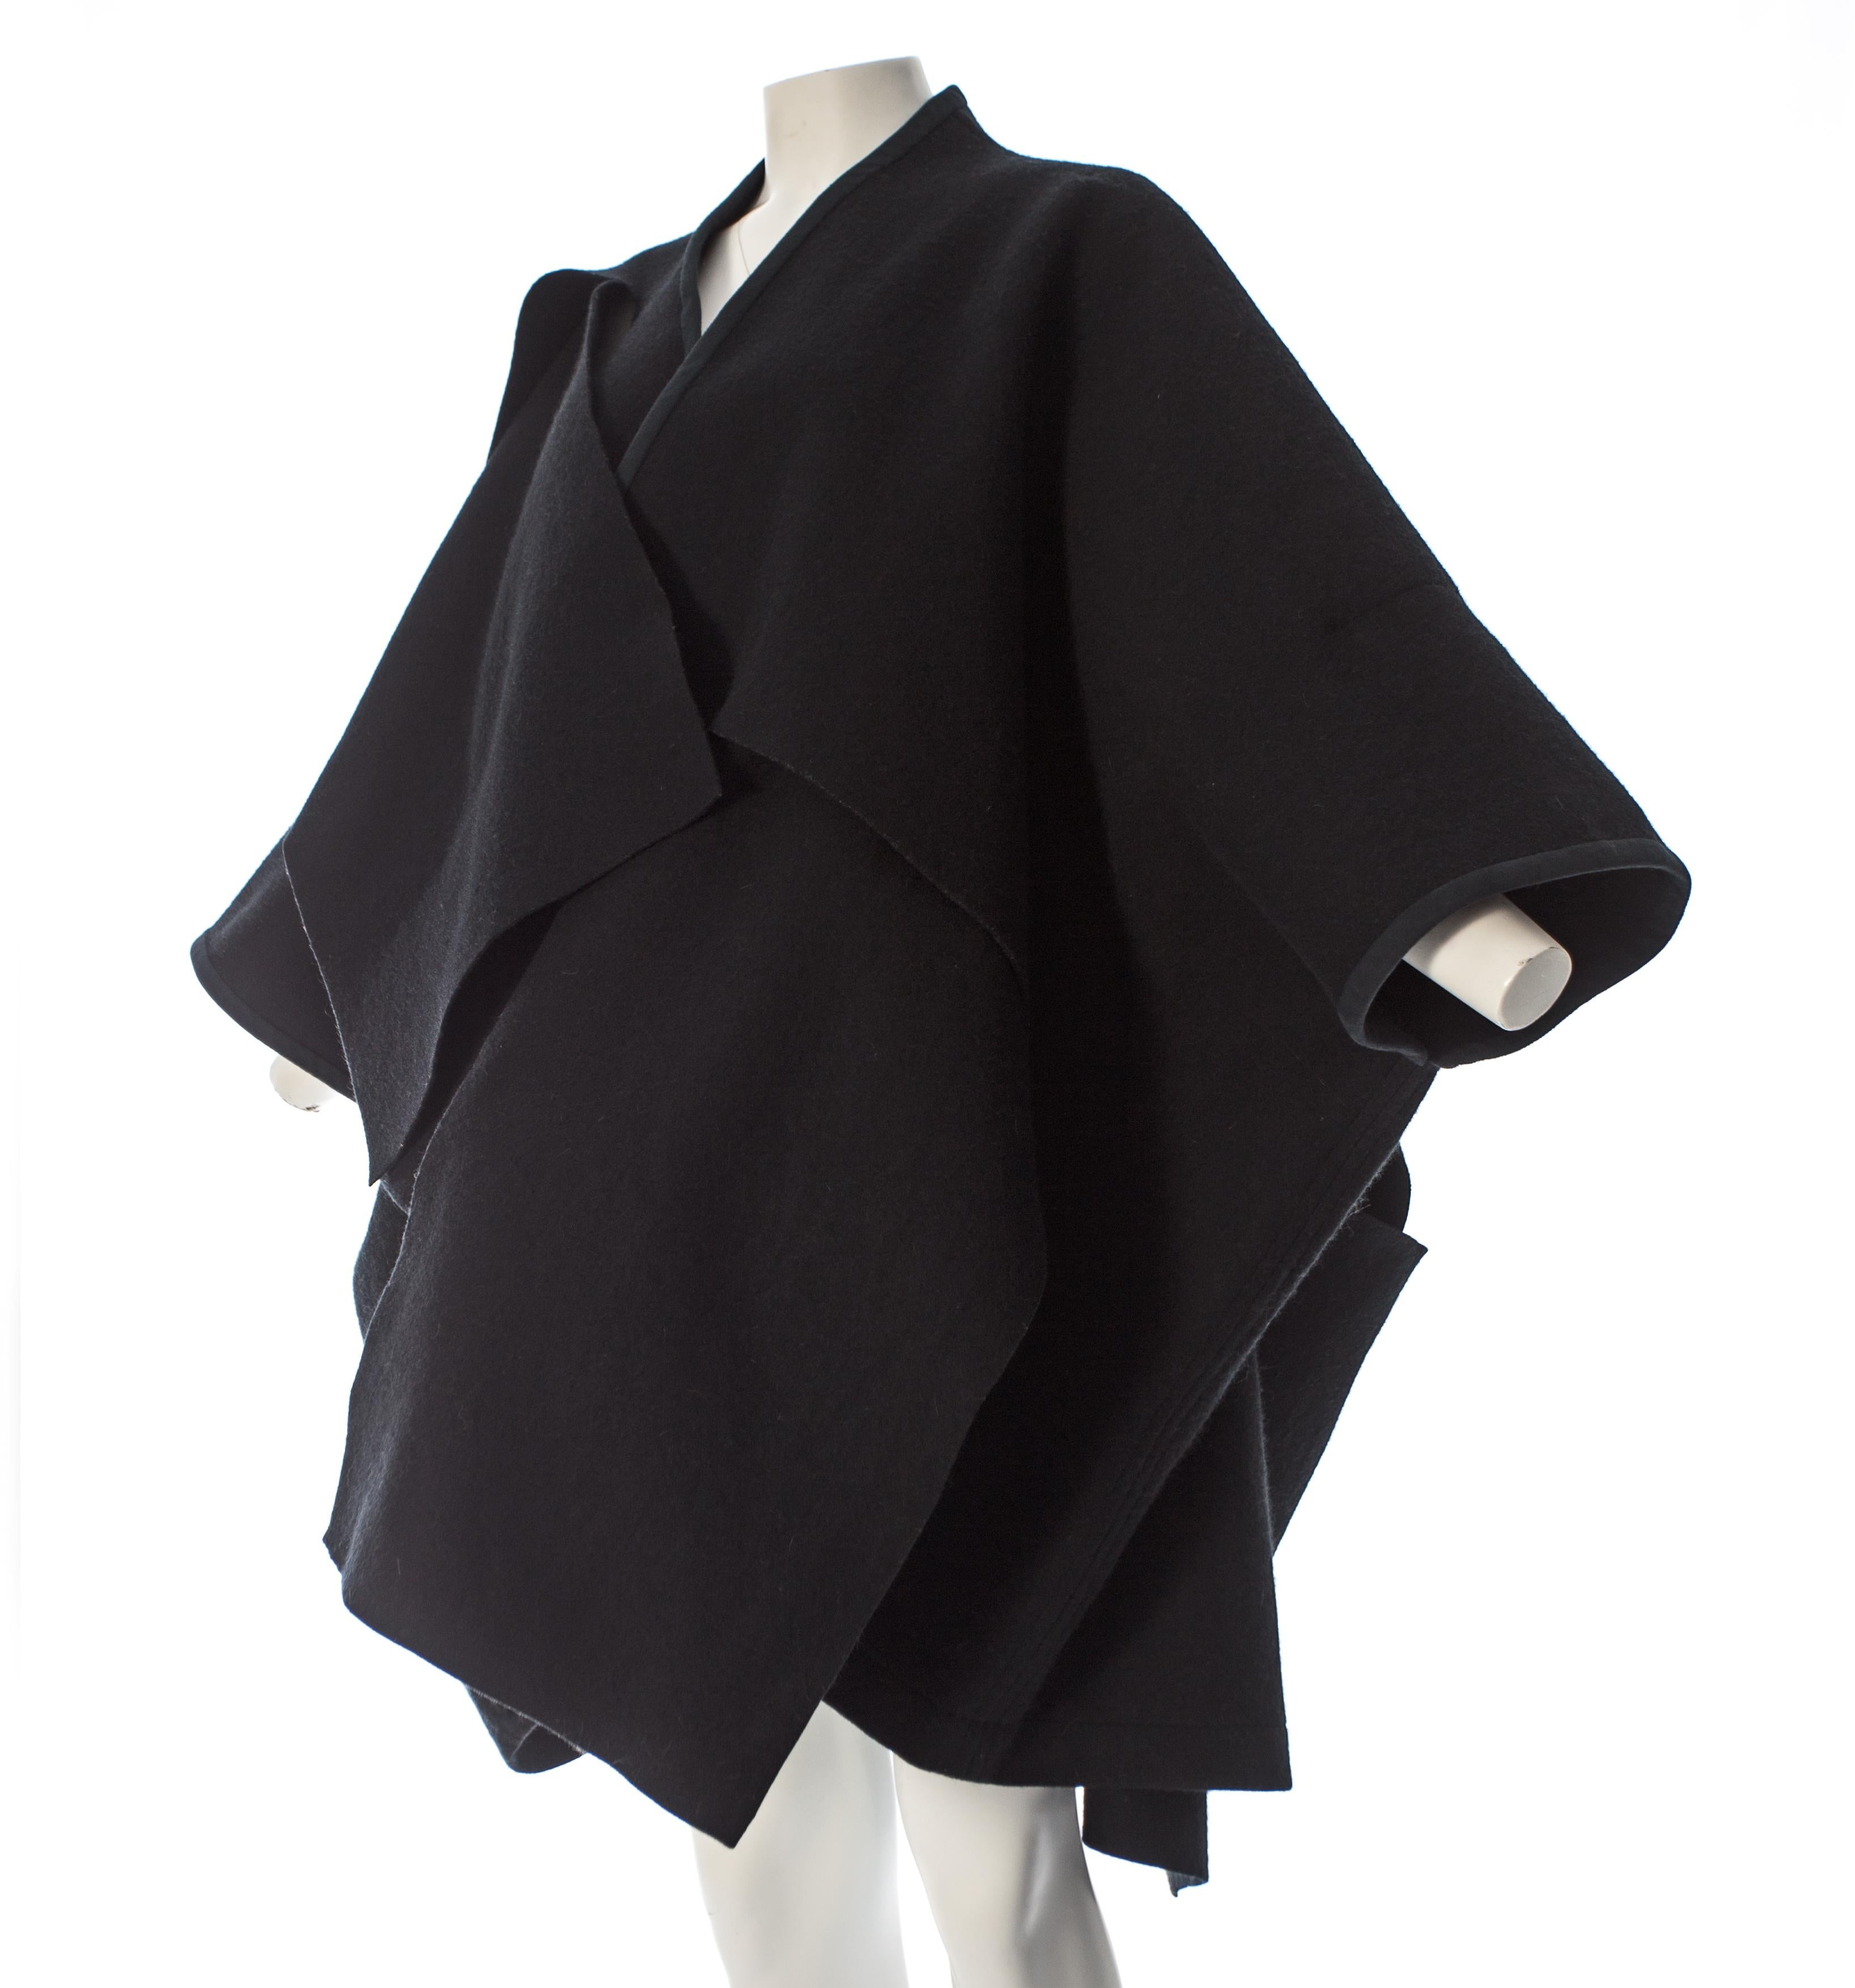 Comme des Garcons black wool coat constructed from large woven panels, AW 1983 1